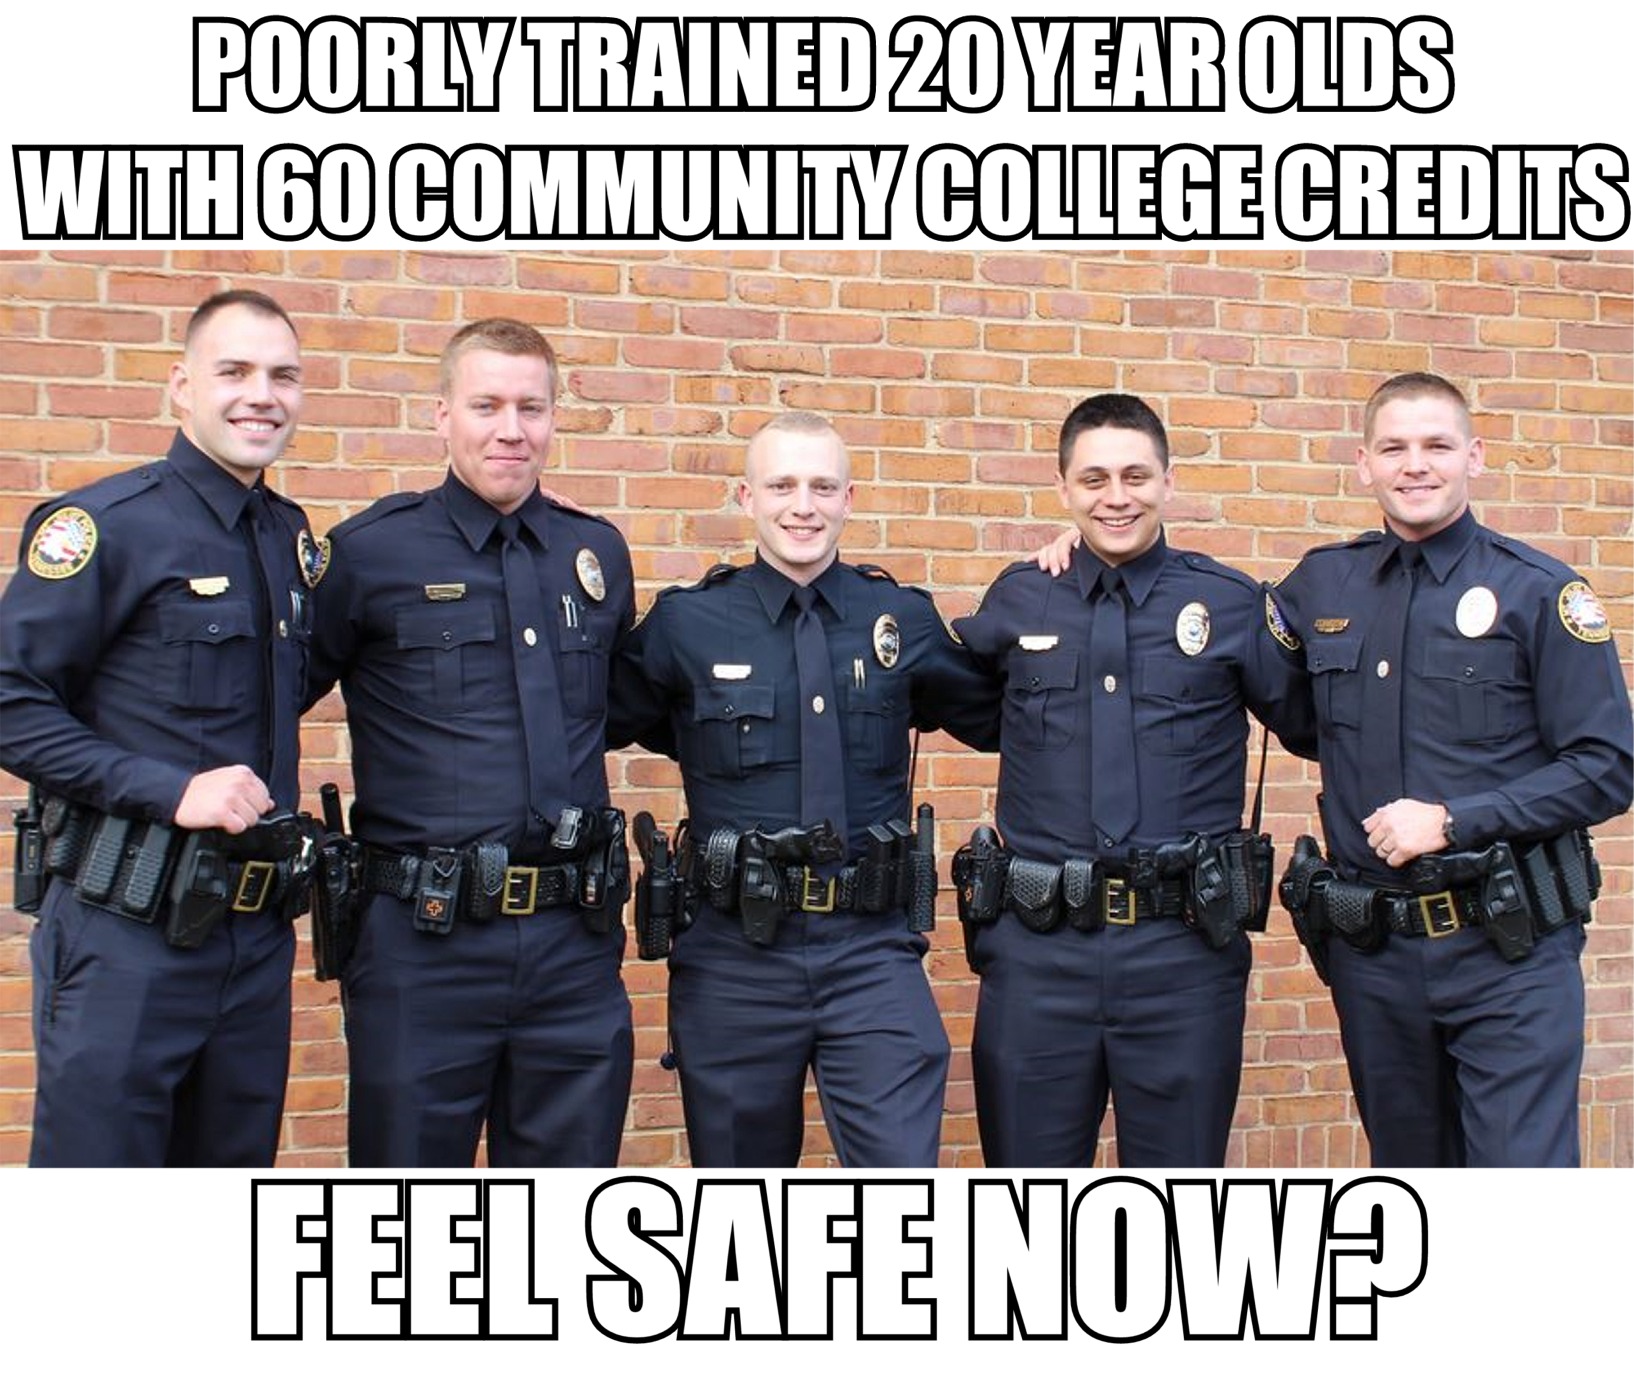 memes - nashville police officers - Poorlytrained 20 Year Olds With 60 Community College Credits Feel Safe Now?